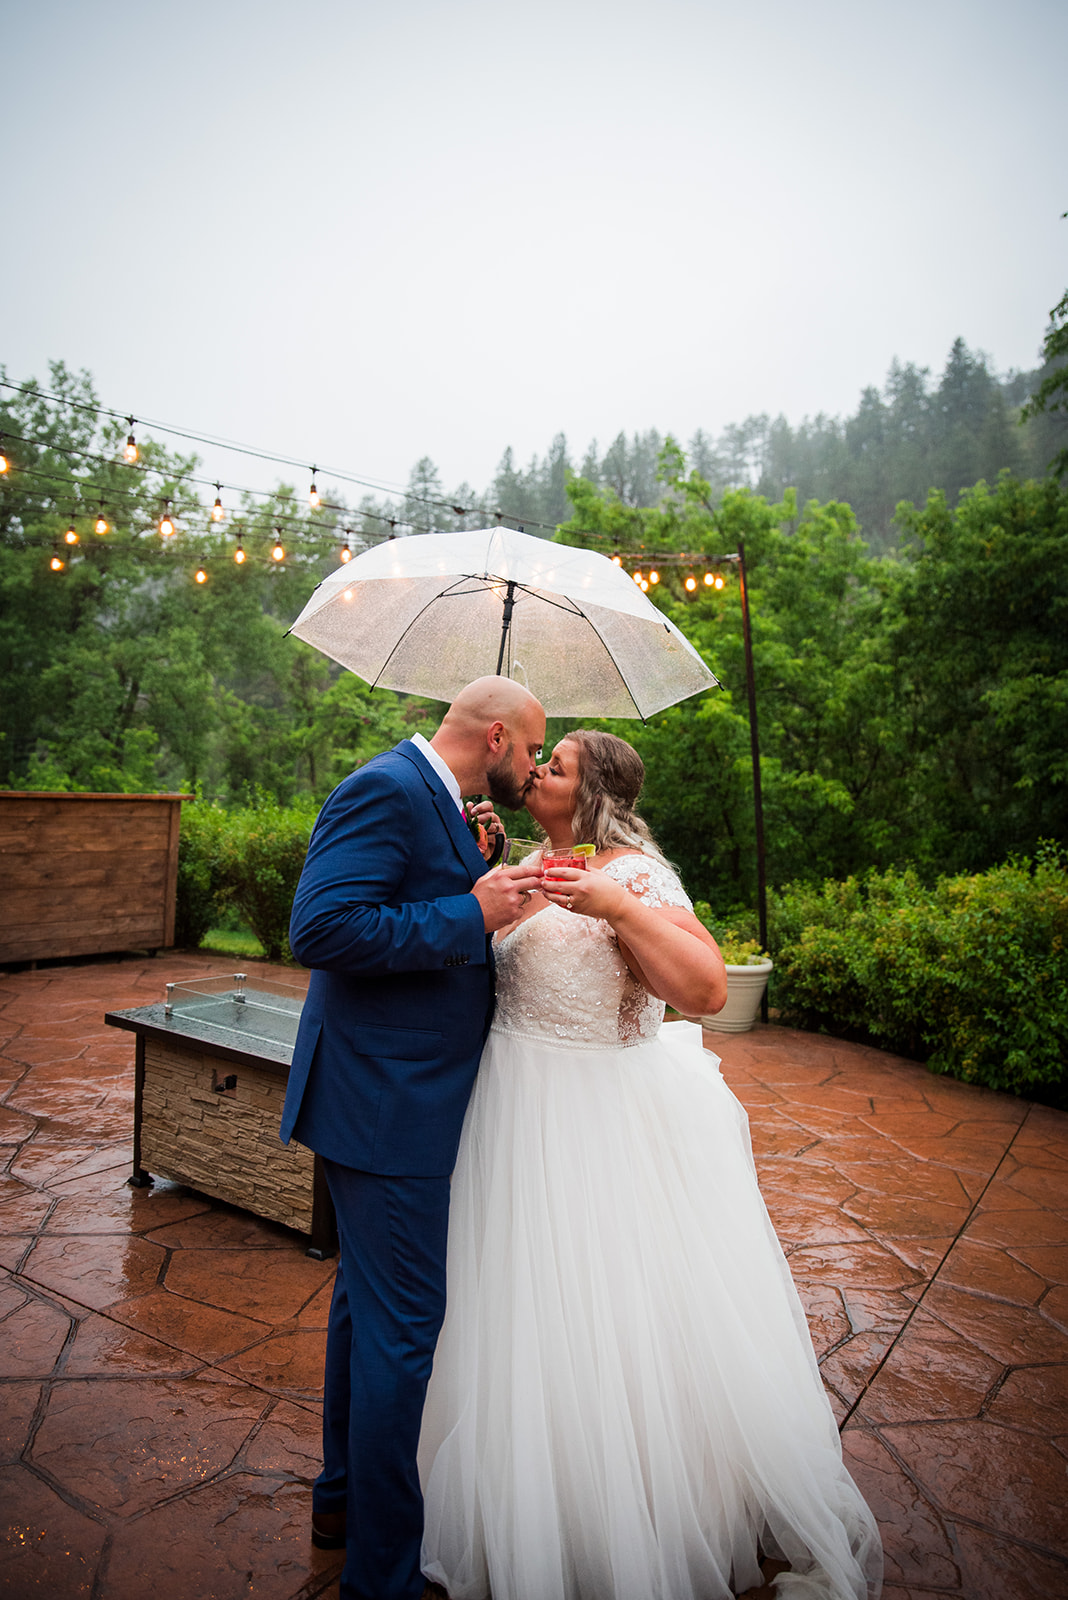 The bride and groom share a kiss in the rain under a clear umbrella.